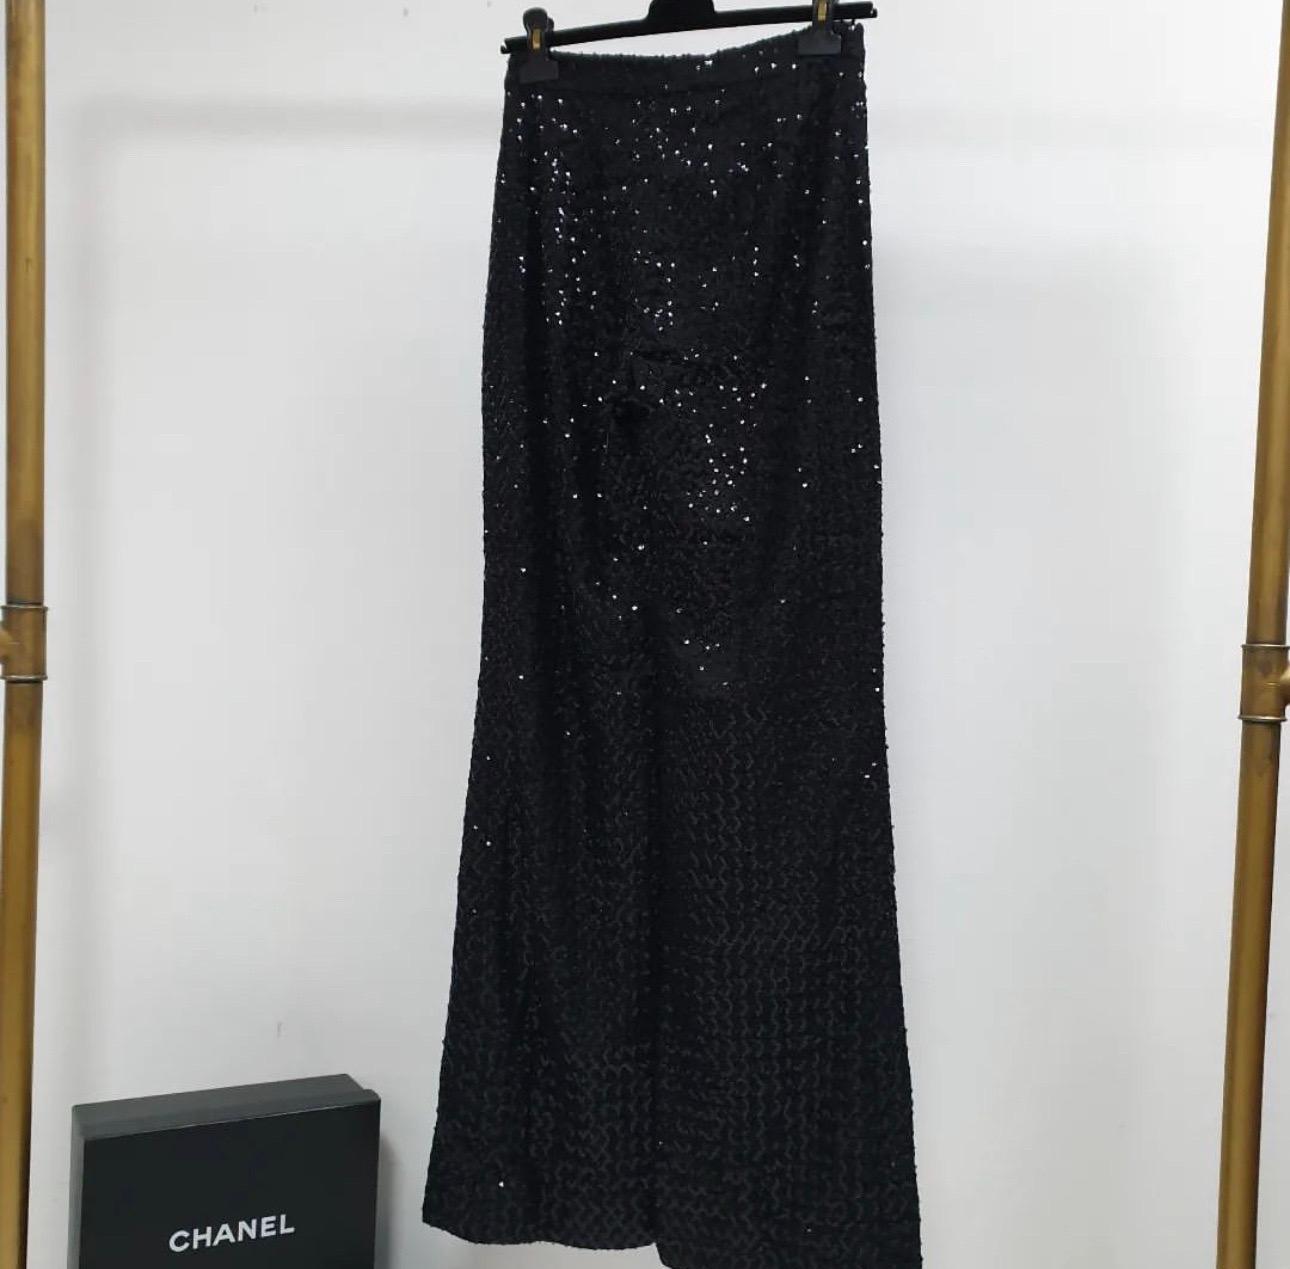 Wide leg black sequins trousers.
New with tags.
Sz.36